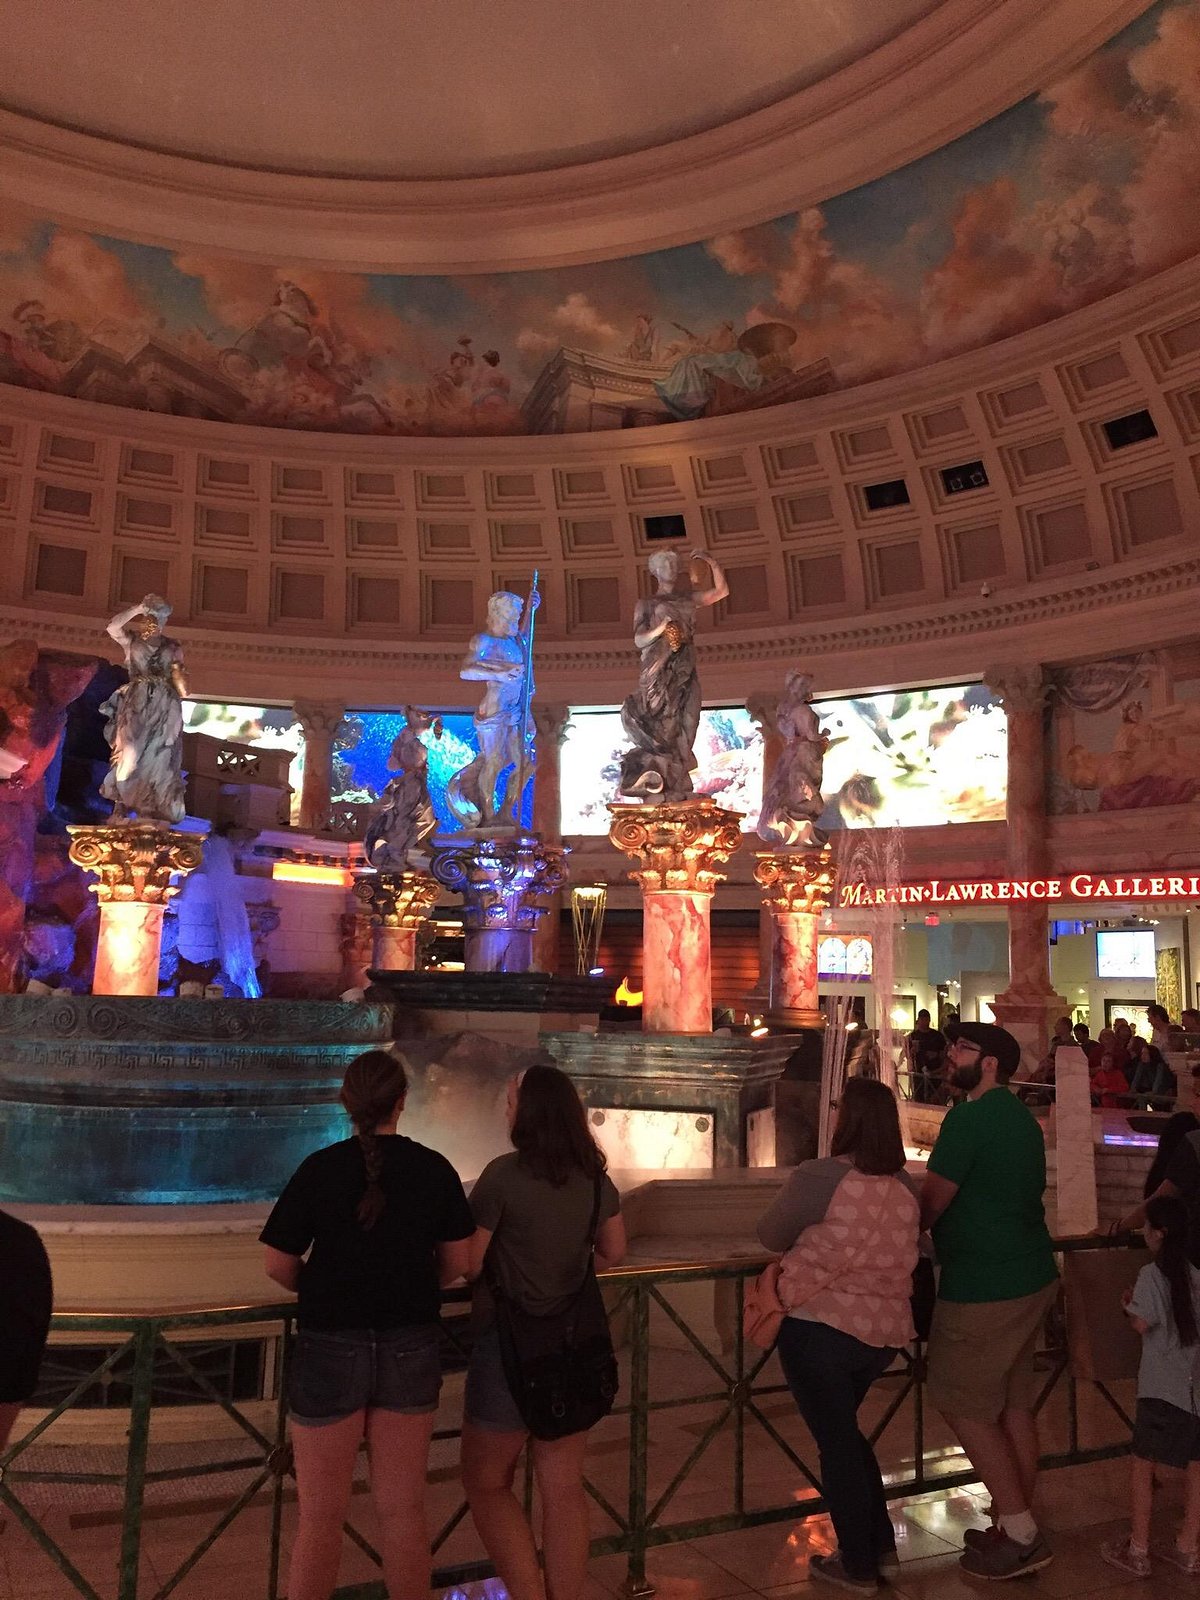 Welcome To The Forum Shops at Caesars Palace® - A Shopping Center